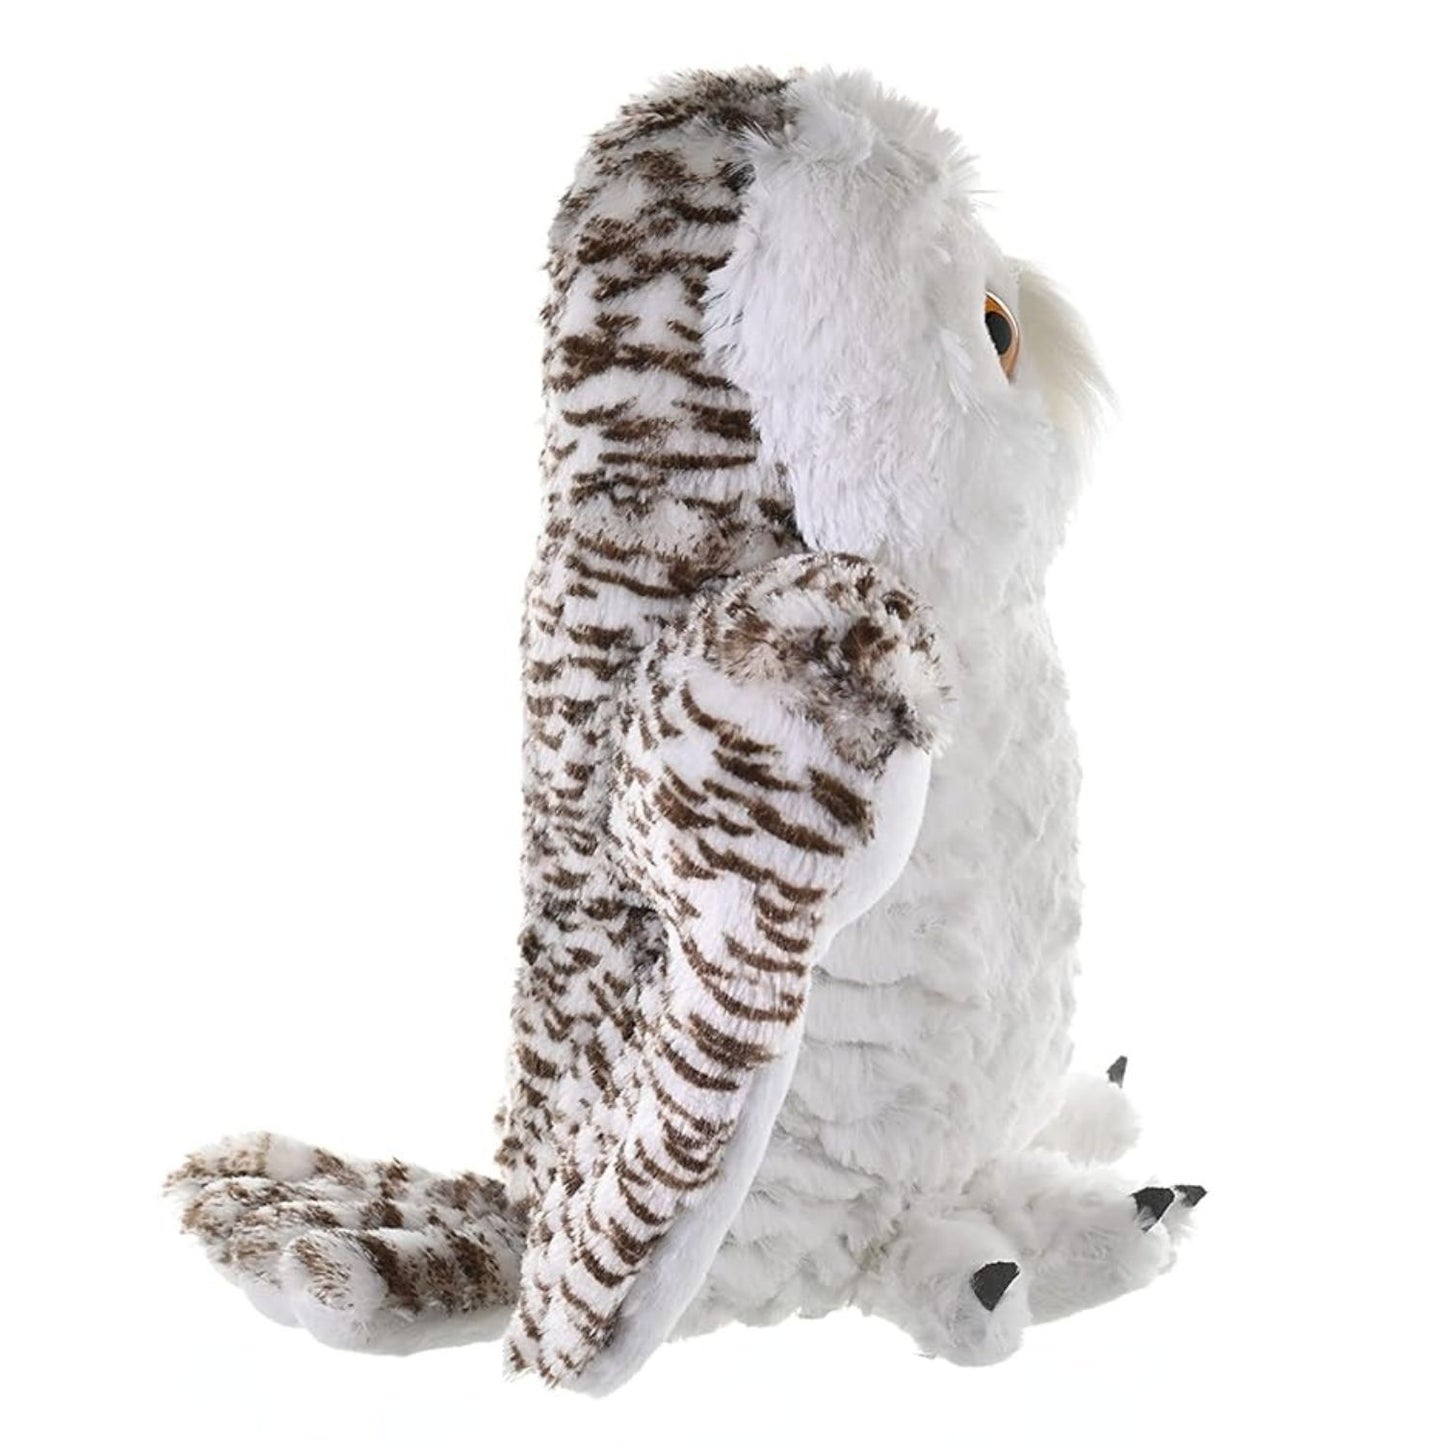 Wild Republic Snowy OWL Soft Toy Plush Animal / Bird 12 Inch For Home Decoration & Gifts - 12 inch  (White)